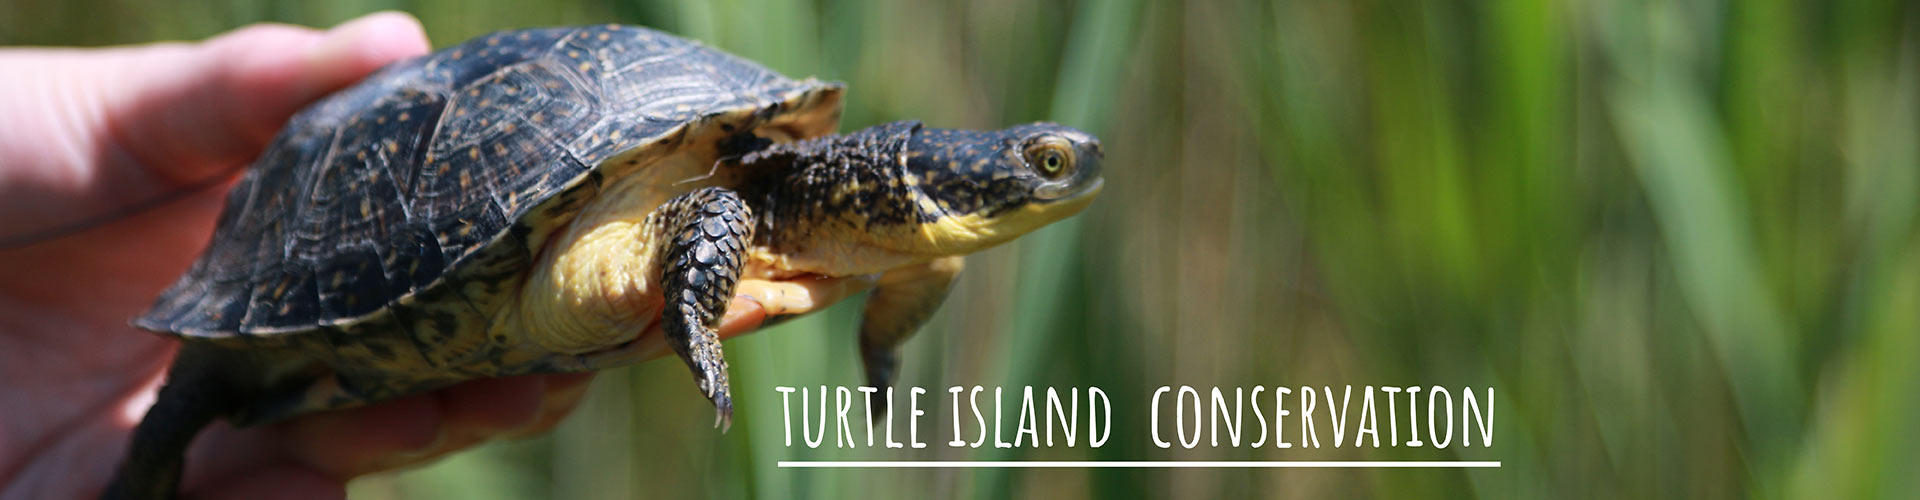 Turtle Island Conservation - Who We Are